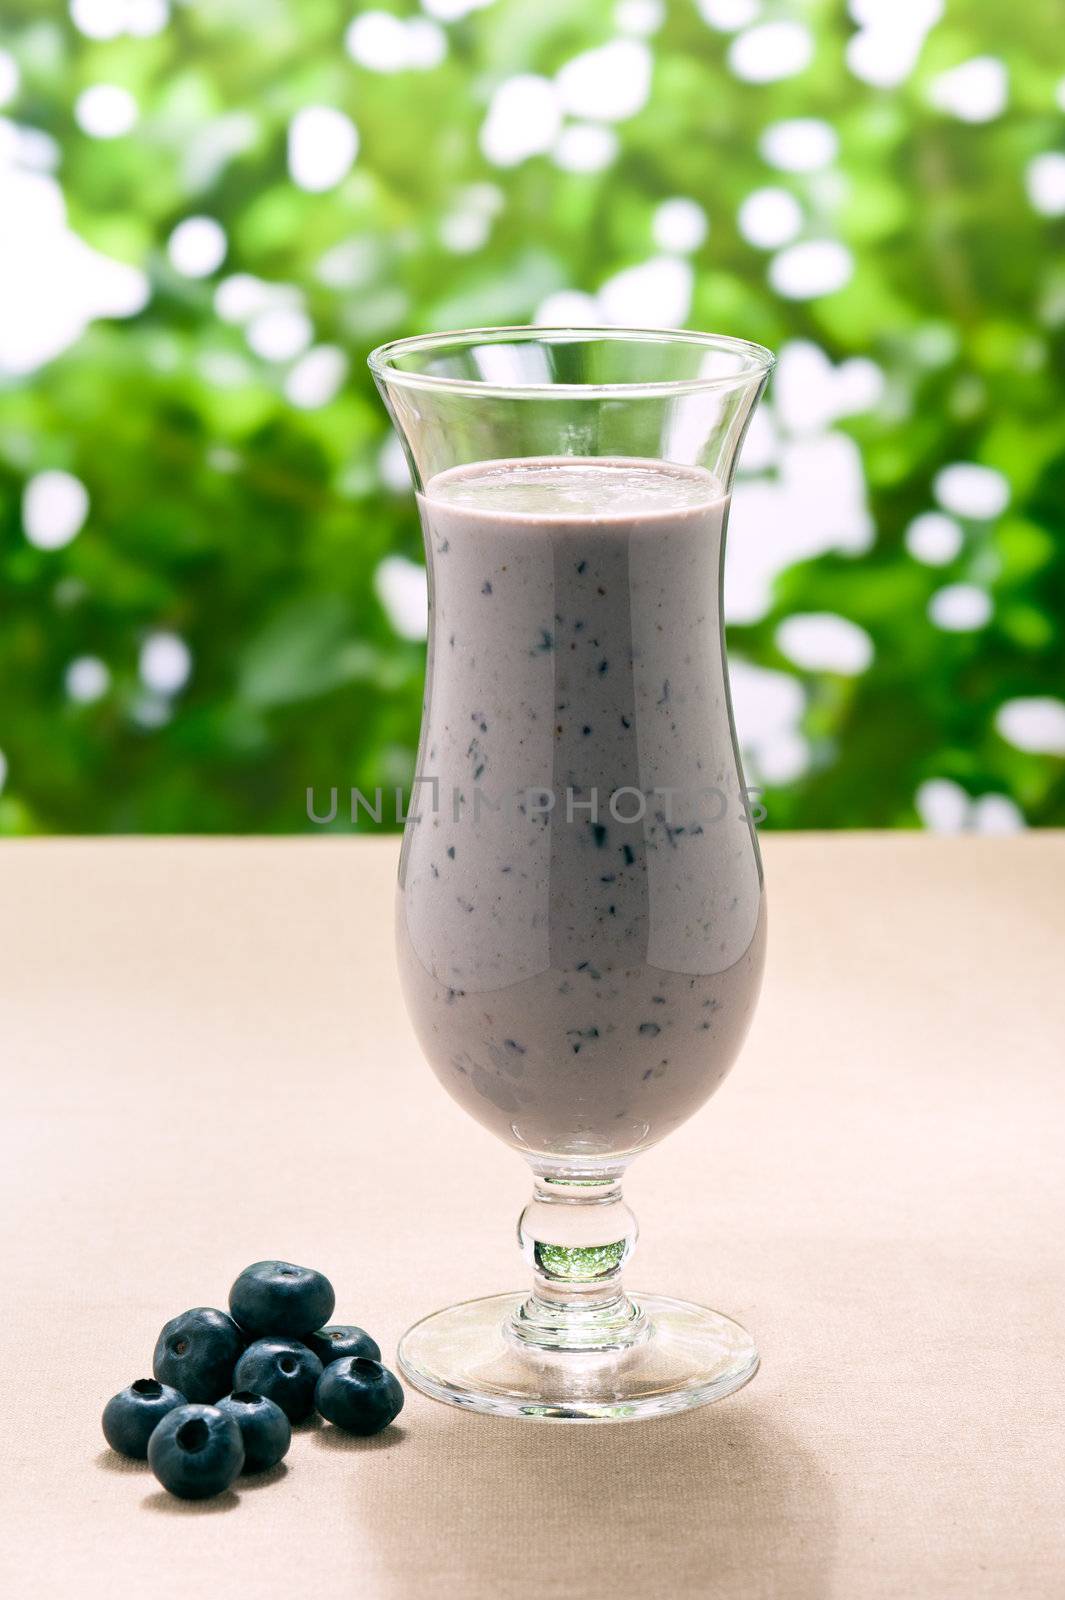 Blueberry milk shake with real fruit and a green background